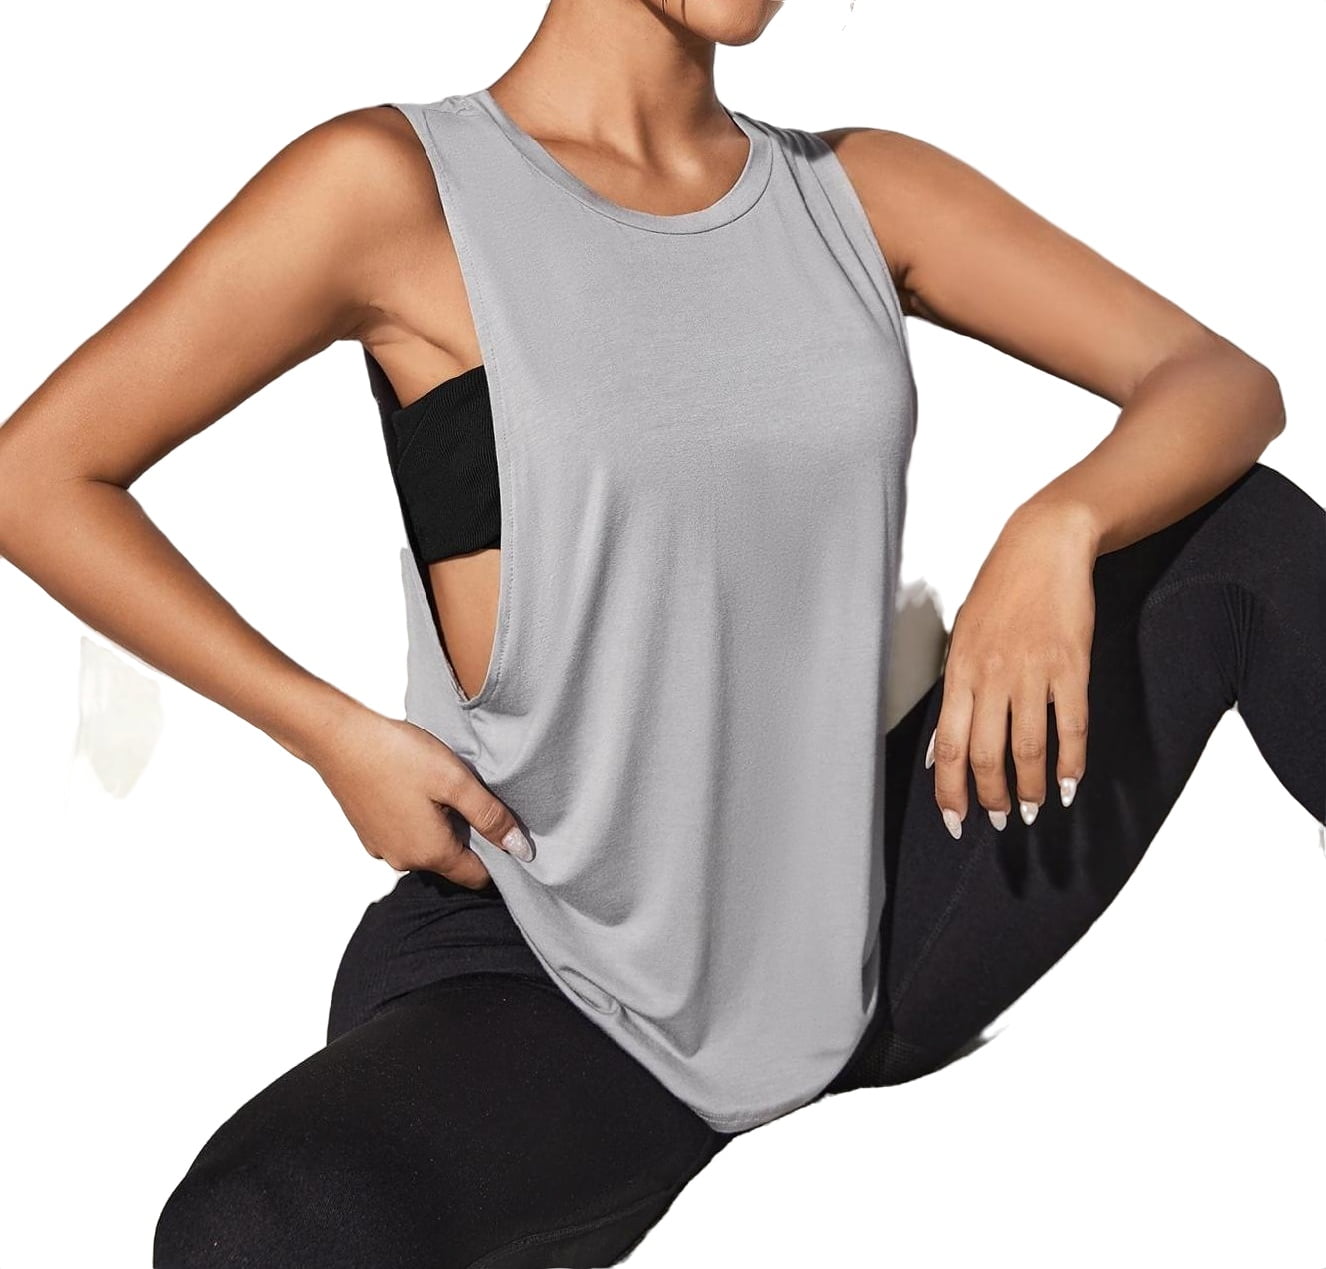 Women's Loose Fit Activewear Workout Gym Tank Tops Drop Armhole Athletic  Sports Running Yoga Tops Shirts XL(12) 